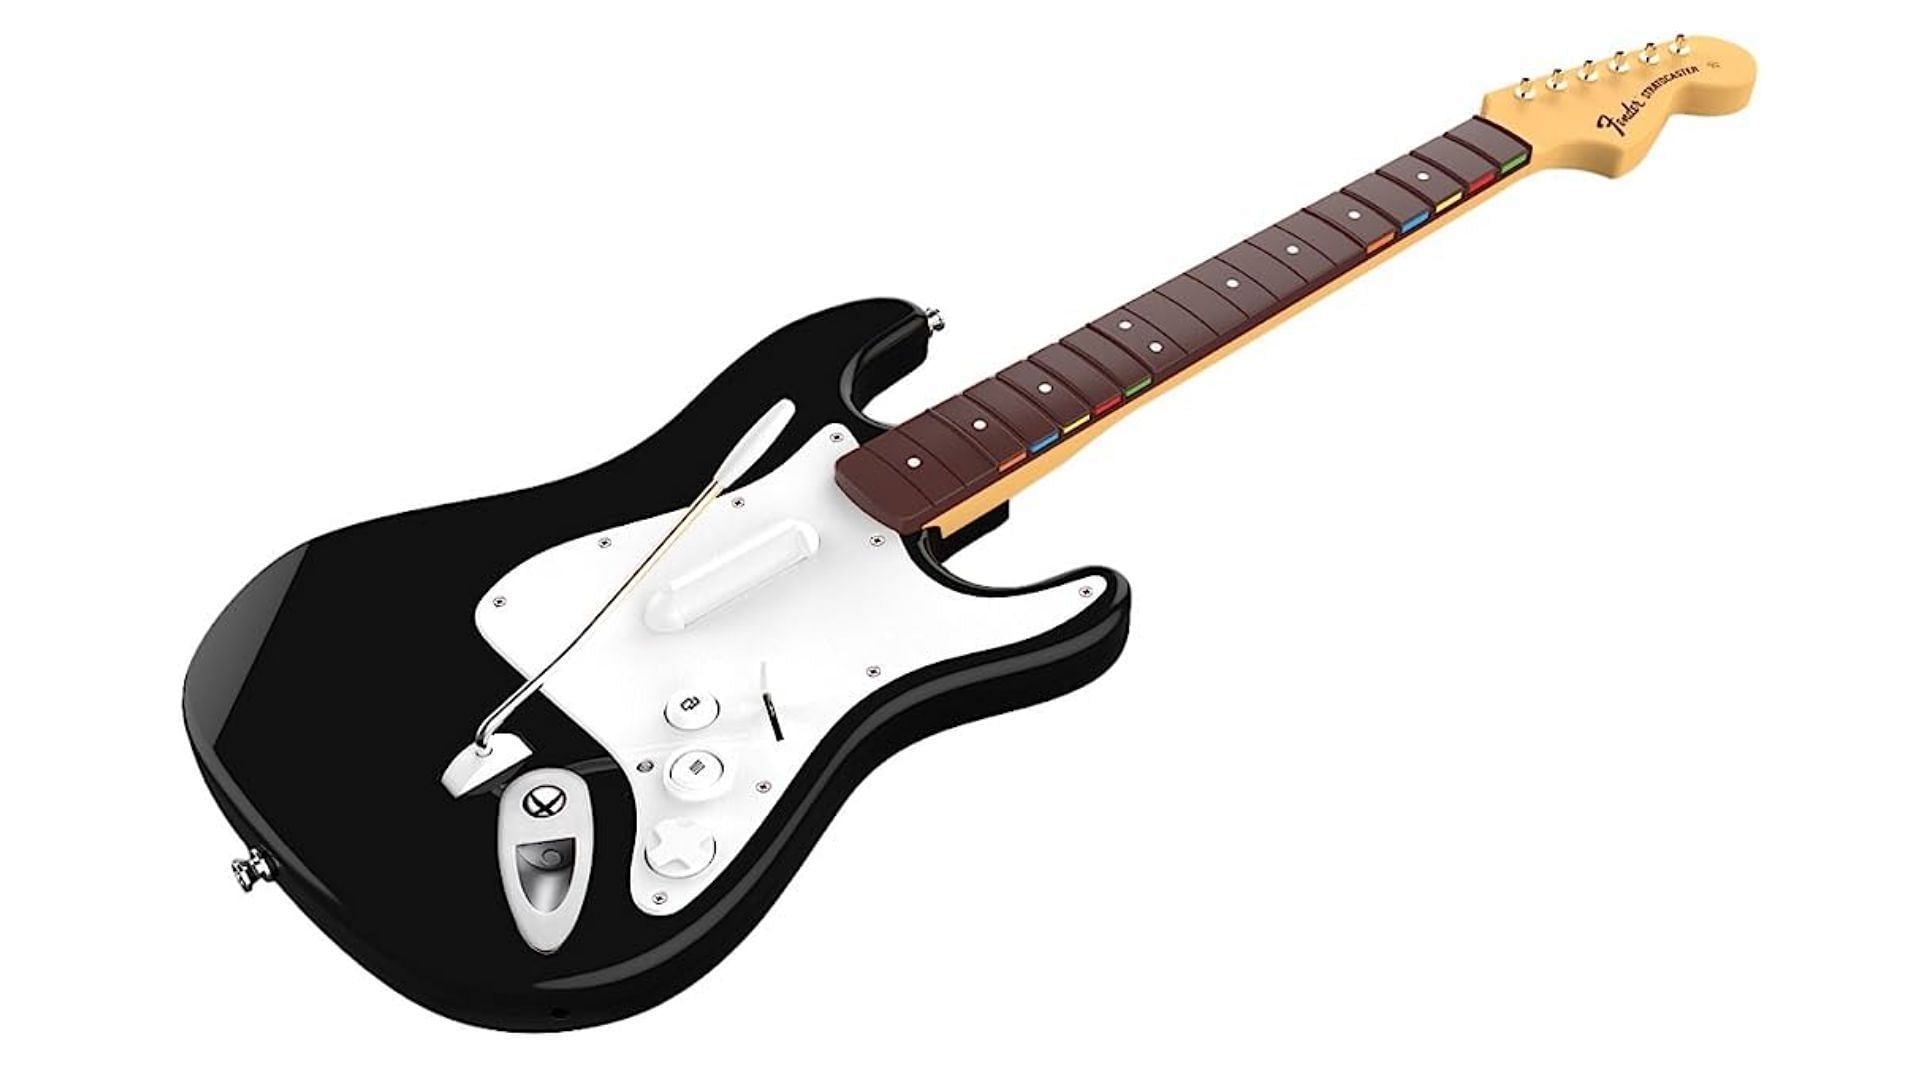 Use Rock Band 4 Guitar Controller for Fortnite Festival games (Image via Amazon/MAD CATZ)